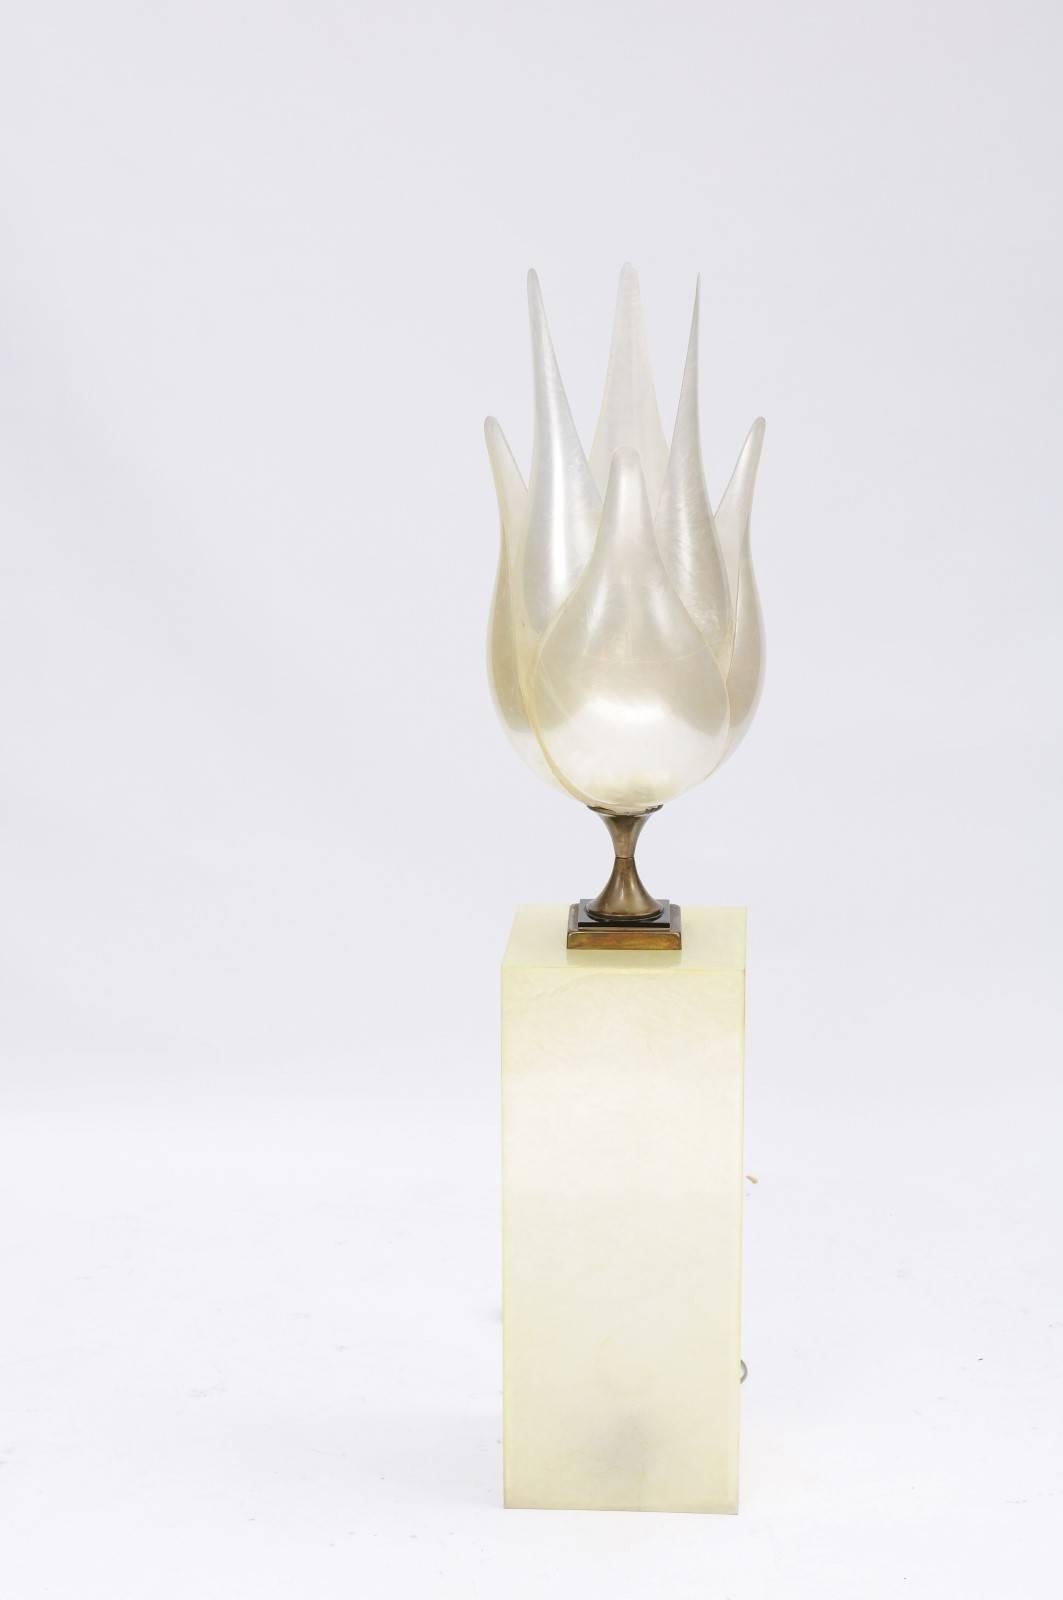 A single six-petal Maison Rougier table lamp on tall Stand from the 1970s. We are officially obsessed with Rougier lamps! This one rises to the occasion with its sexy and sinuous form and soft, yet lustrous light. Perched on a bold and beautiful